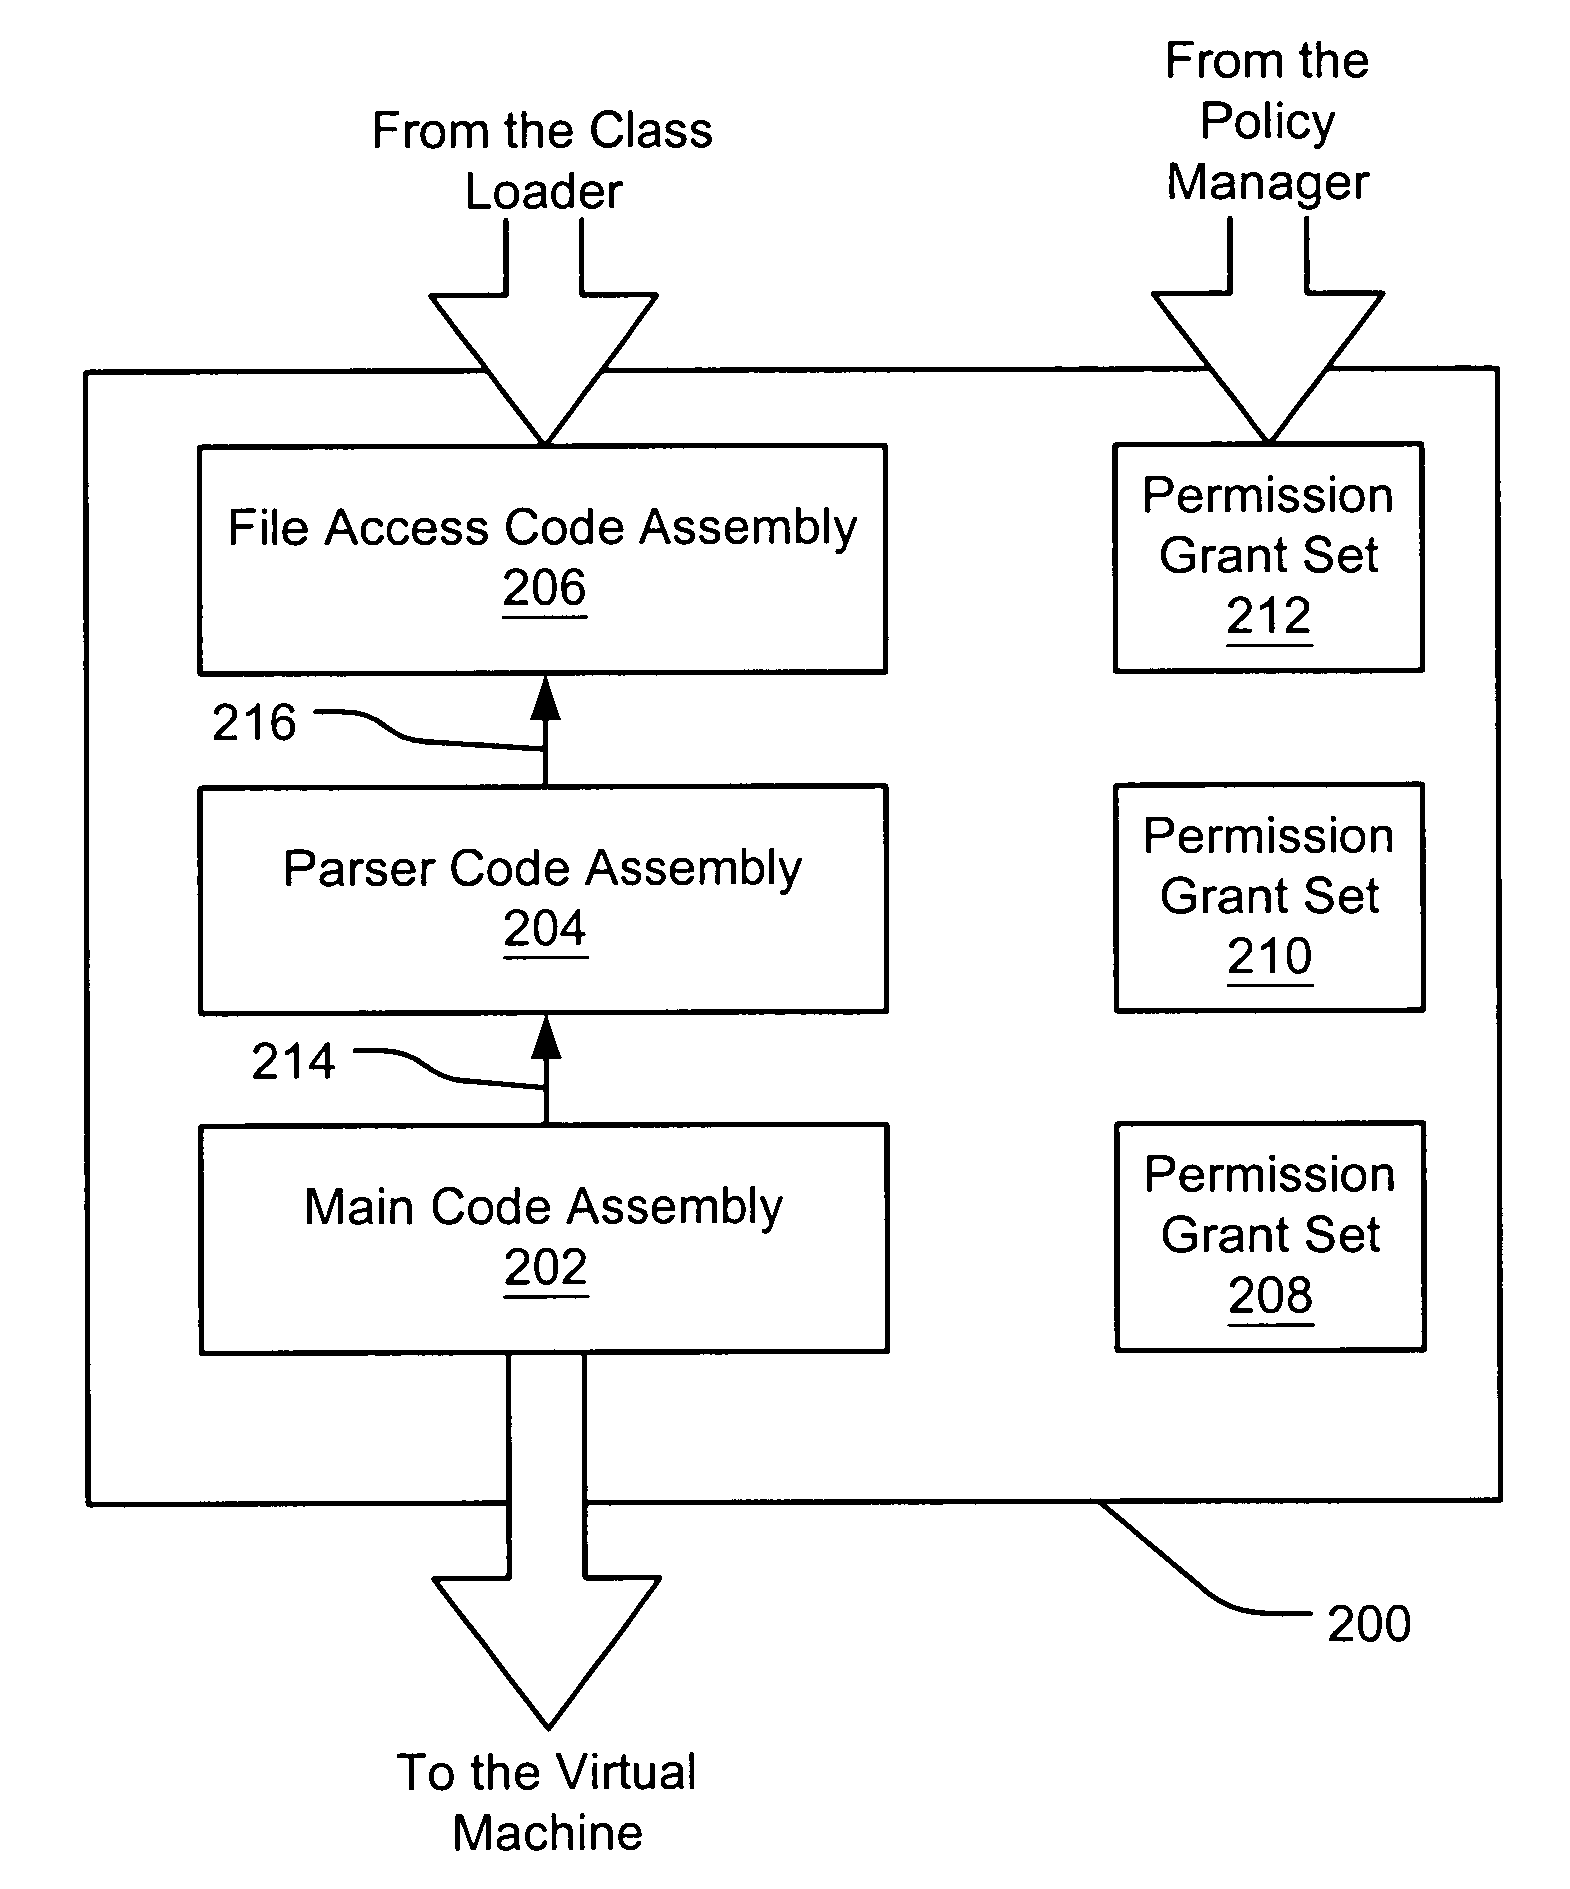 Filtering a permission set using permission requests associated with a code assembly